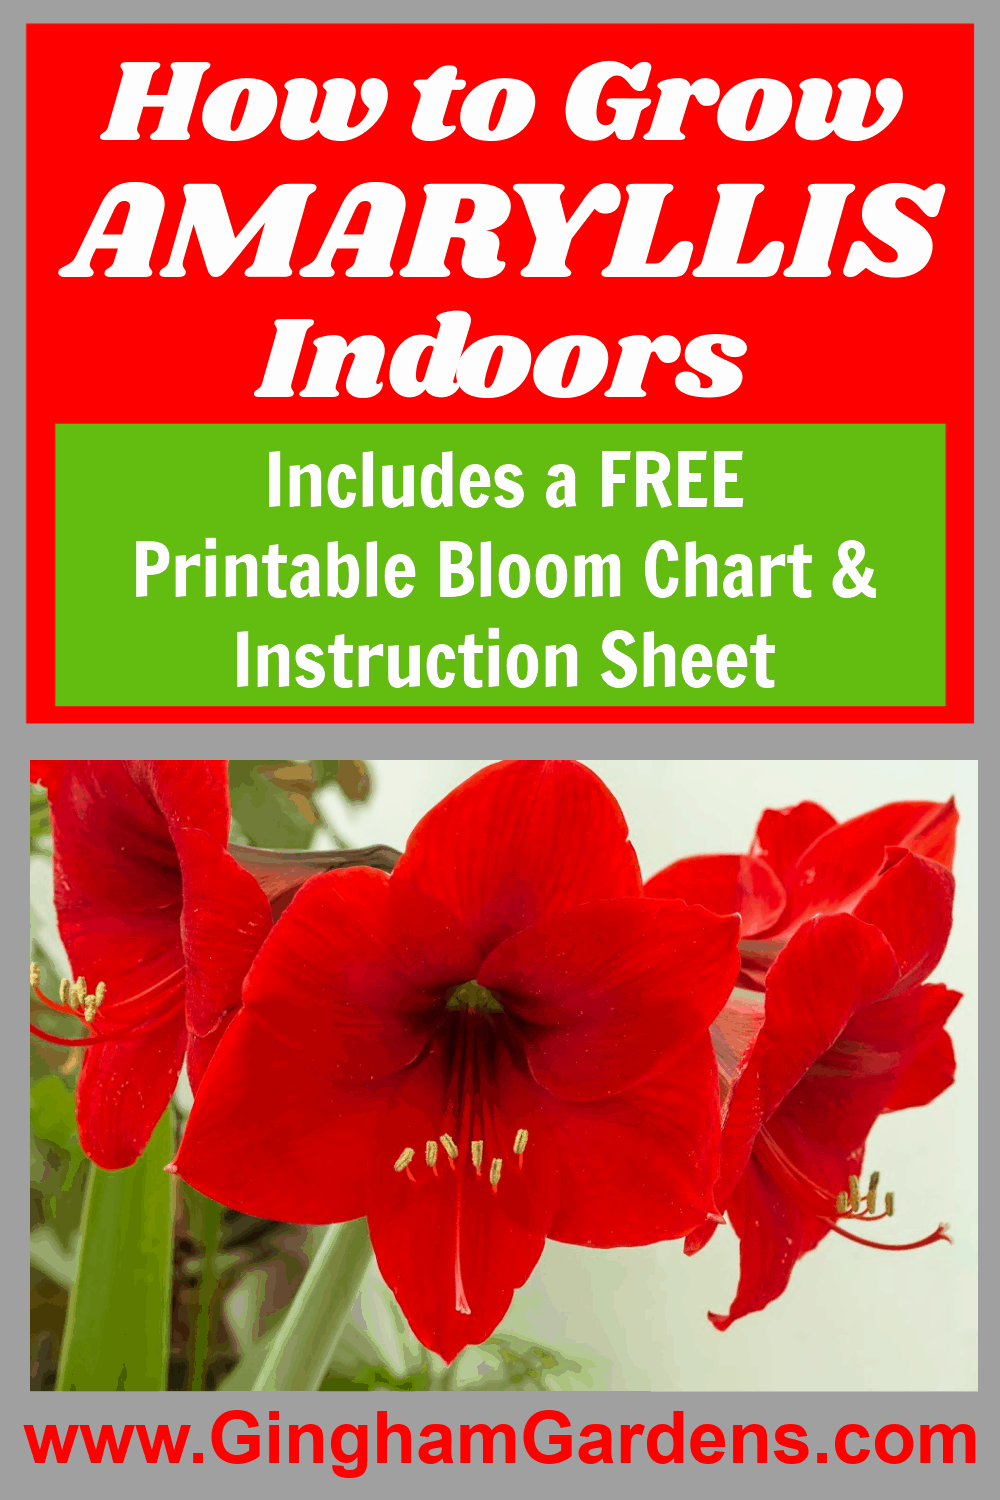 Image of a red amaryllis with text overlay - How to grow amaryllis indoors.